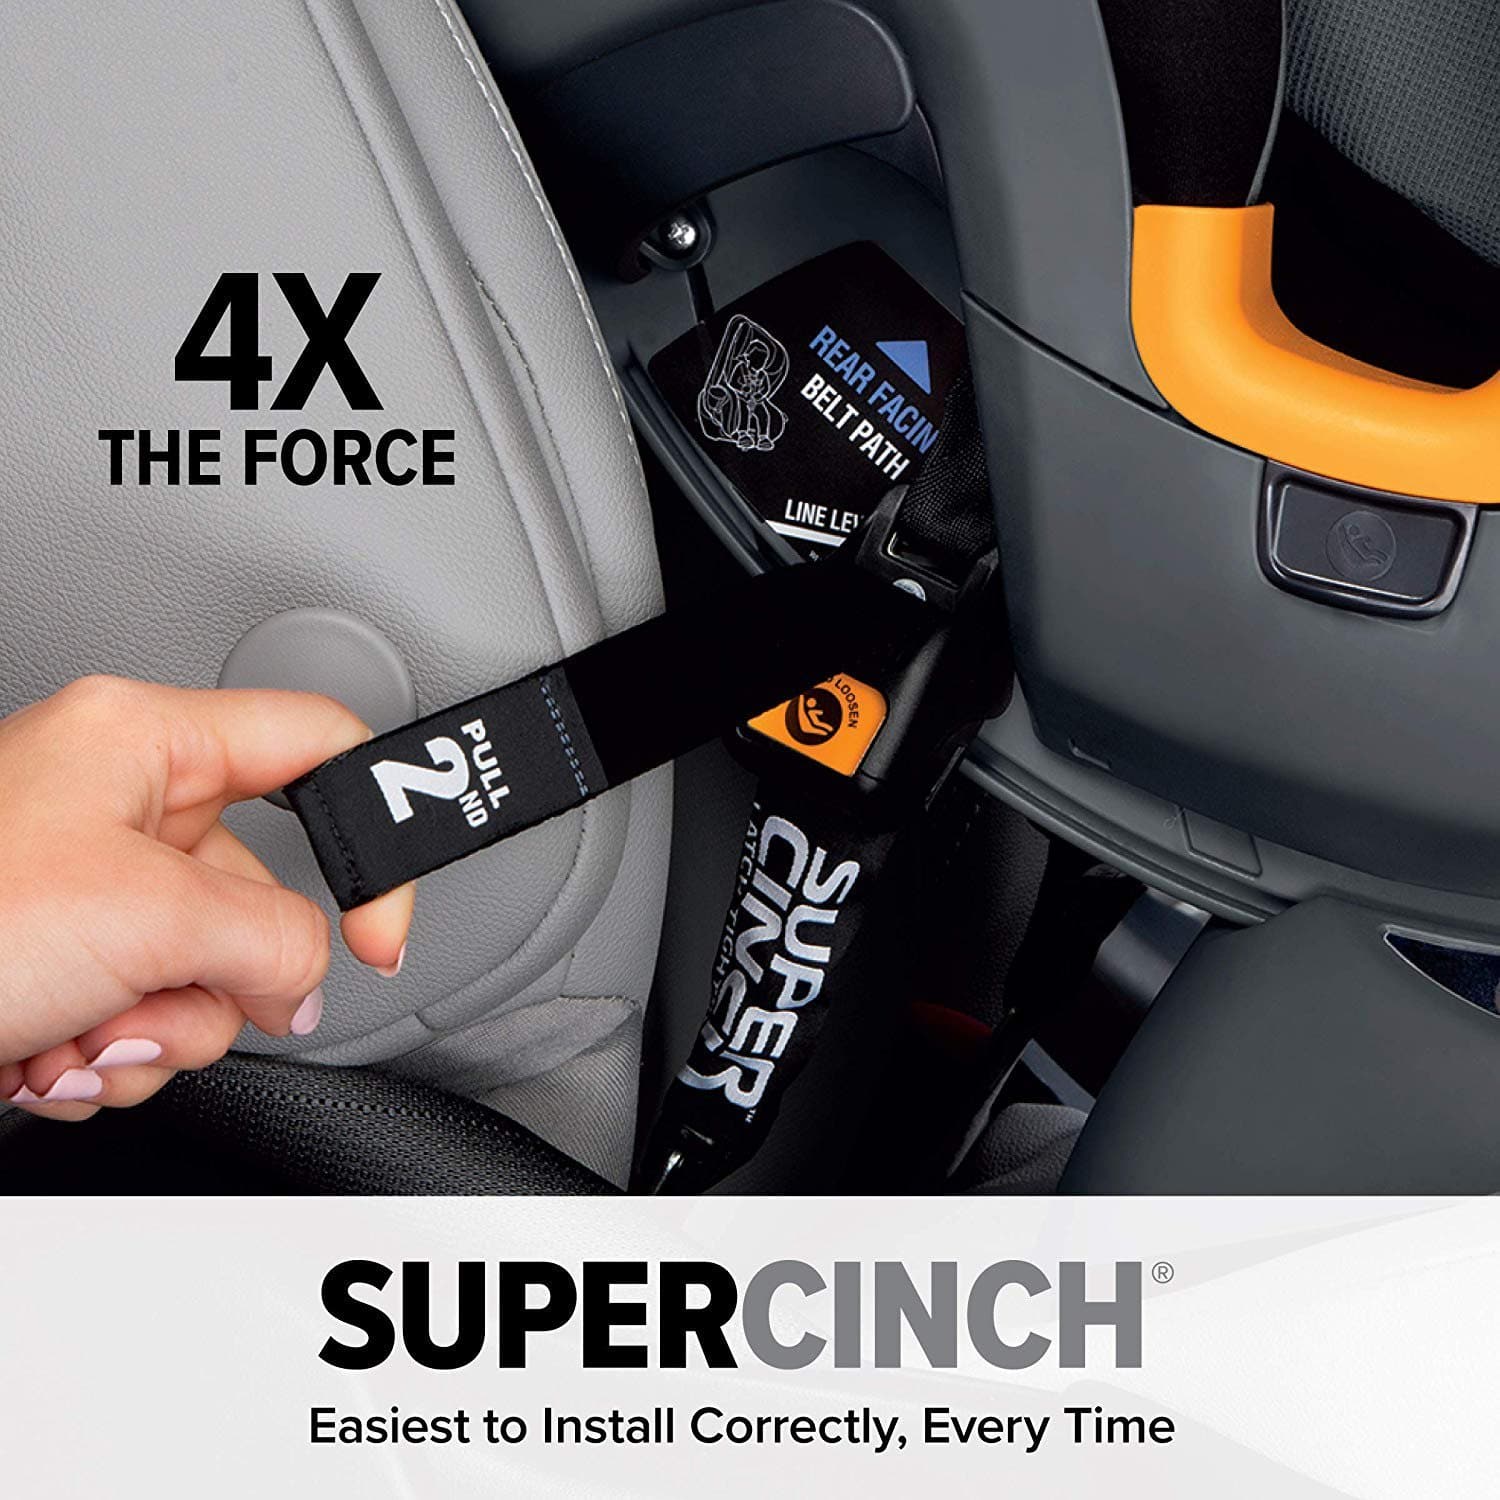 FIT4 4-IN-1 CONVERTIBLE CAR SEAT ONYX